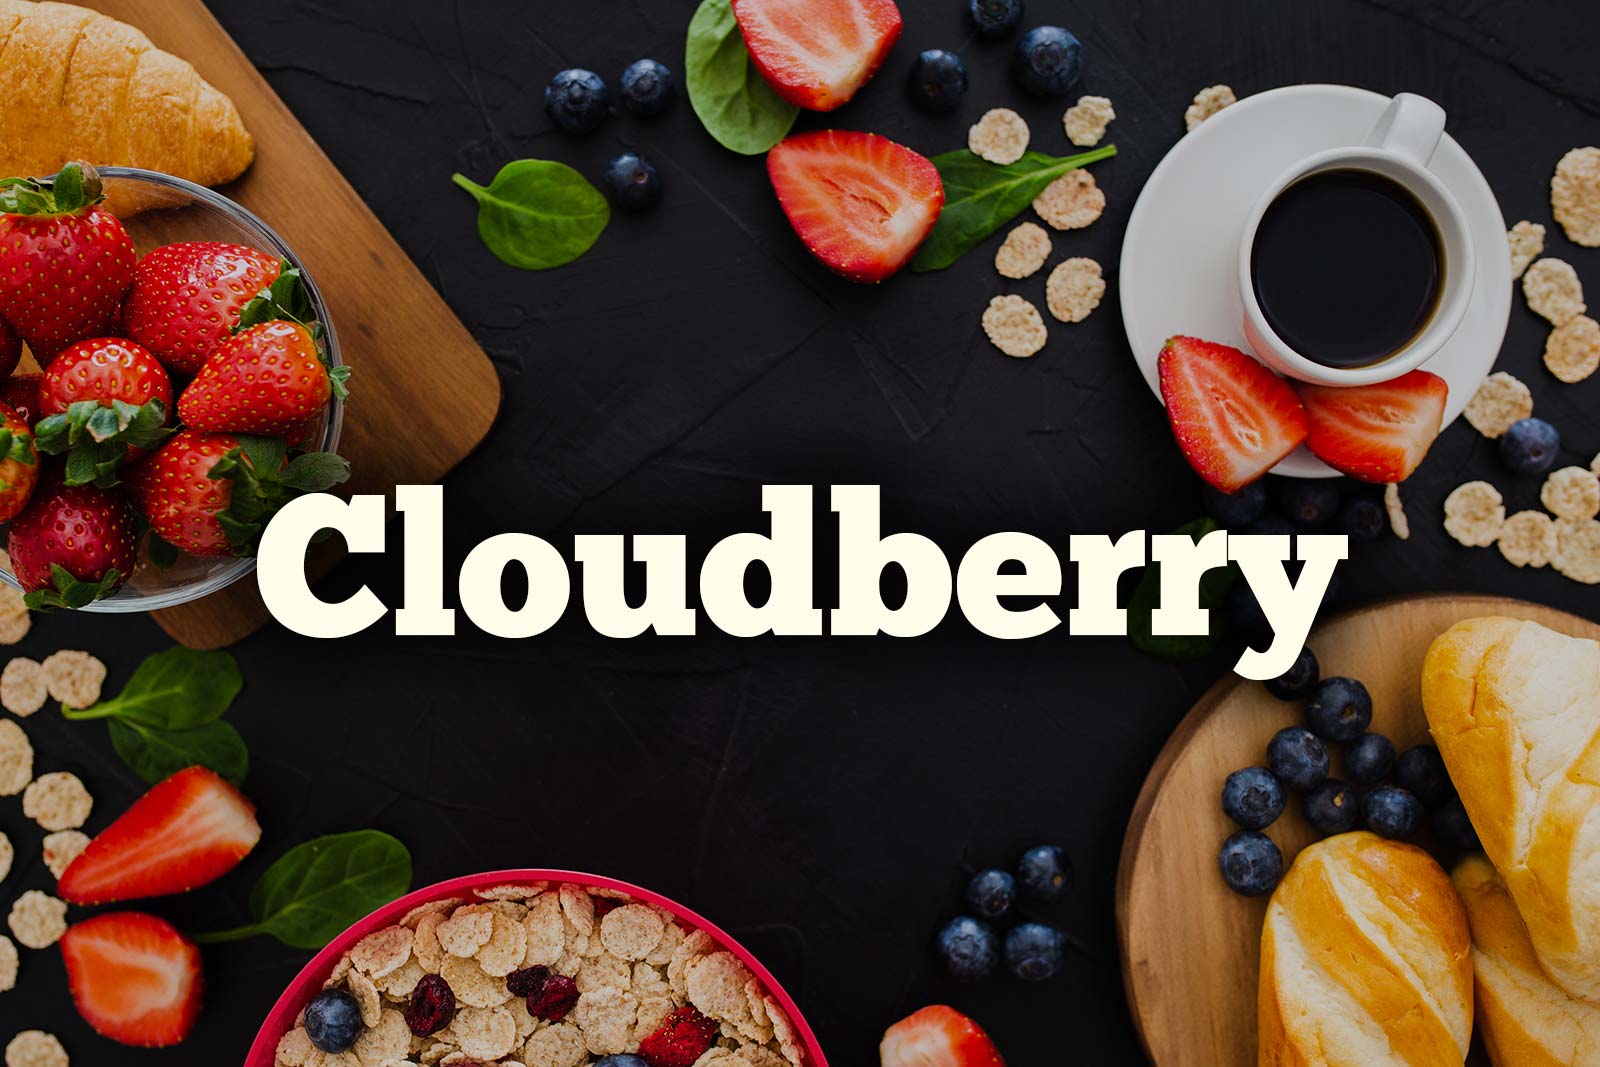 🍓 I’m Pretty Sure You Can’t Identify at Least 15/21 of These Berries Background Cloudberry